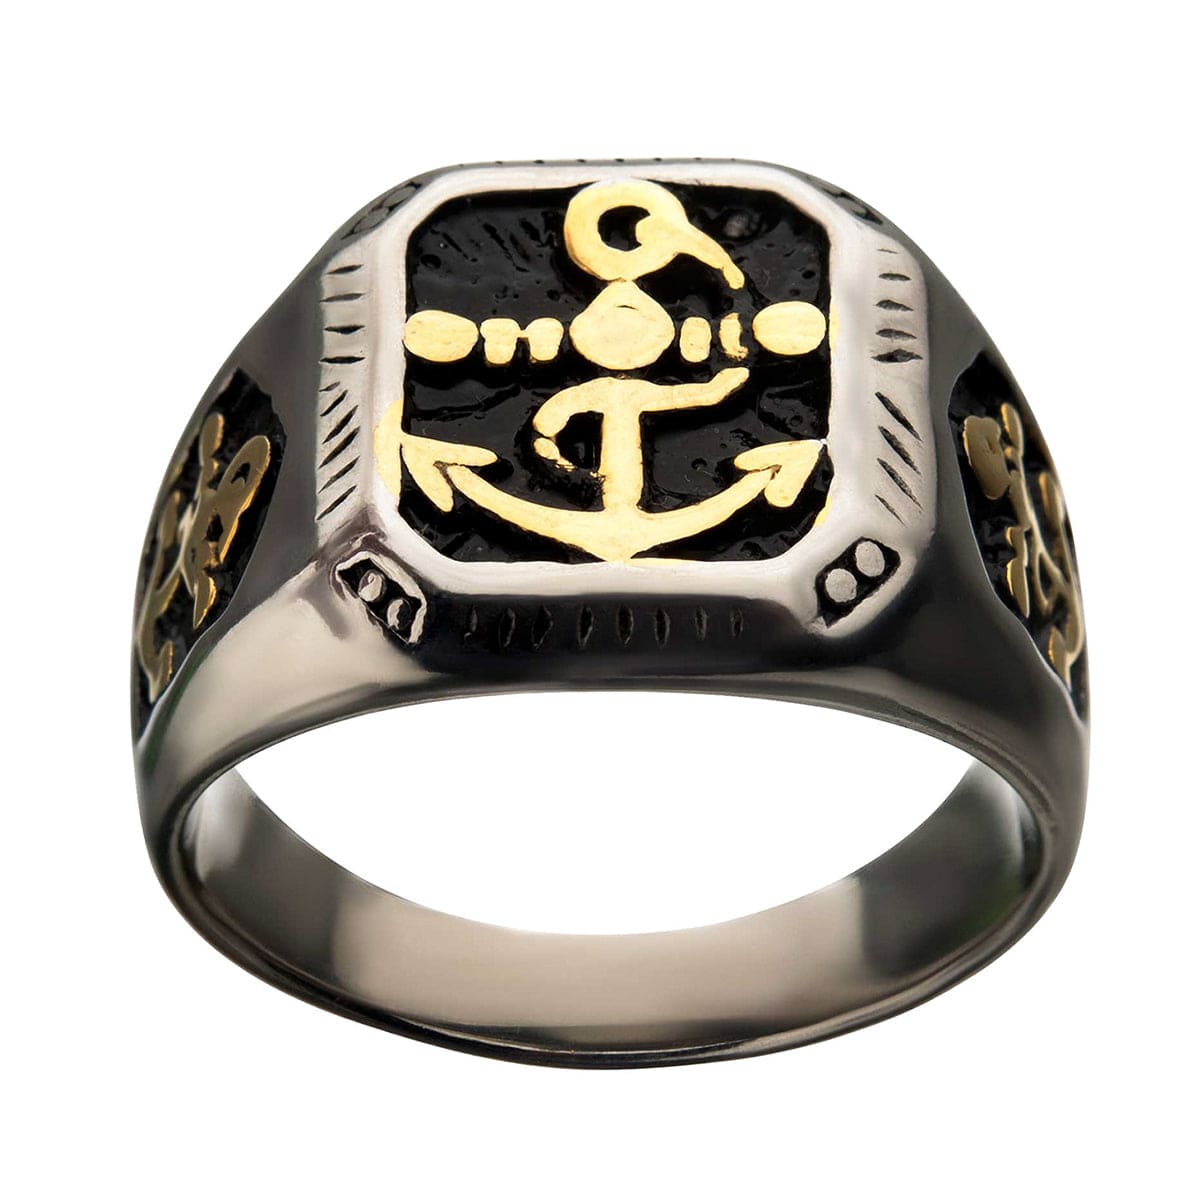 INOX JEWELRY Rings Golden Tone, Black and Antiqued Silver Tone Stainless Steel Vintage Anchor Signet Ring